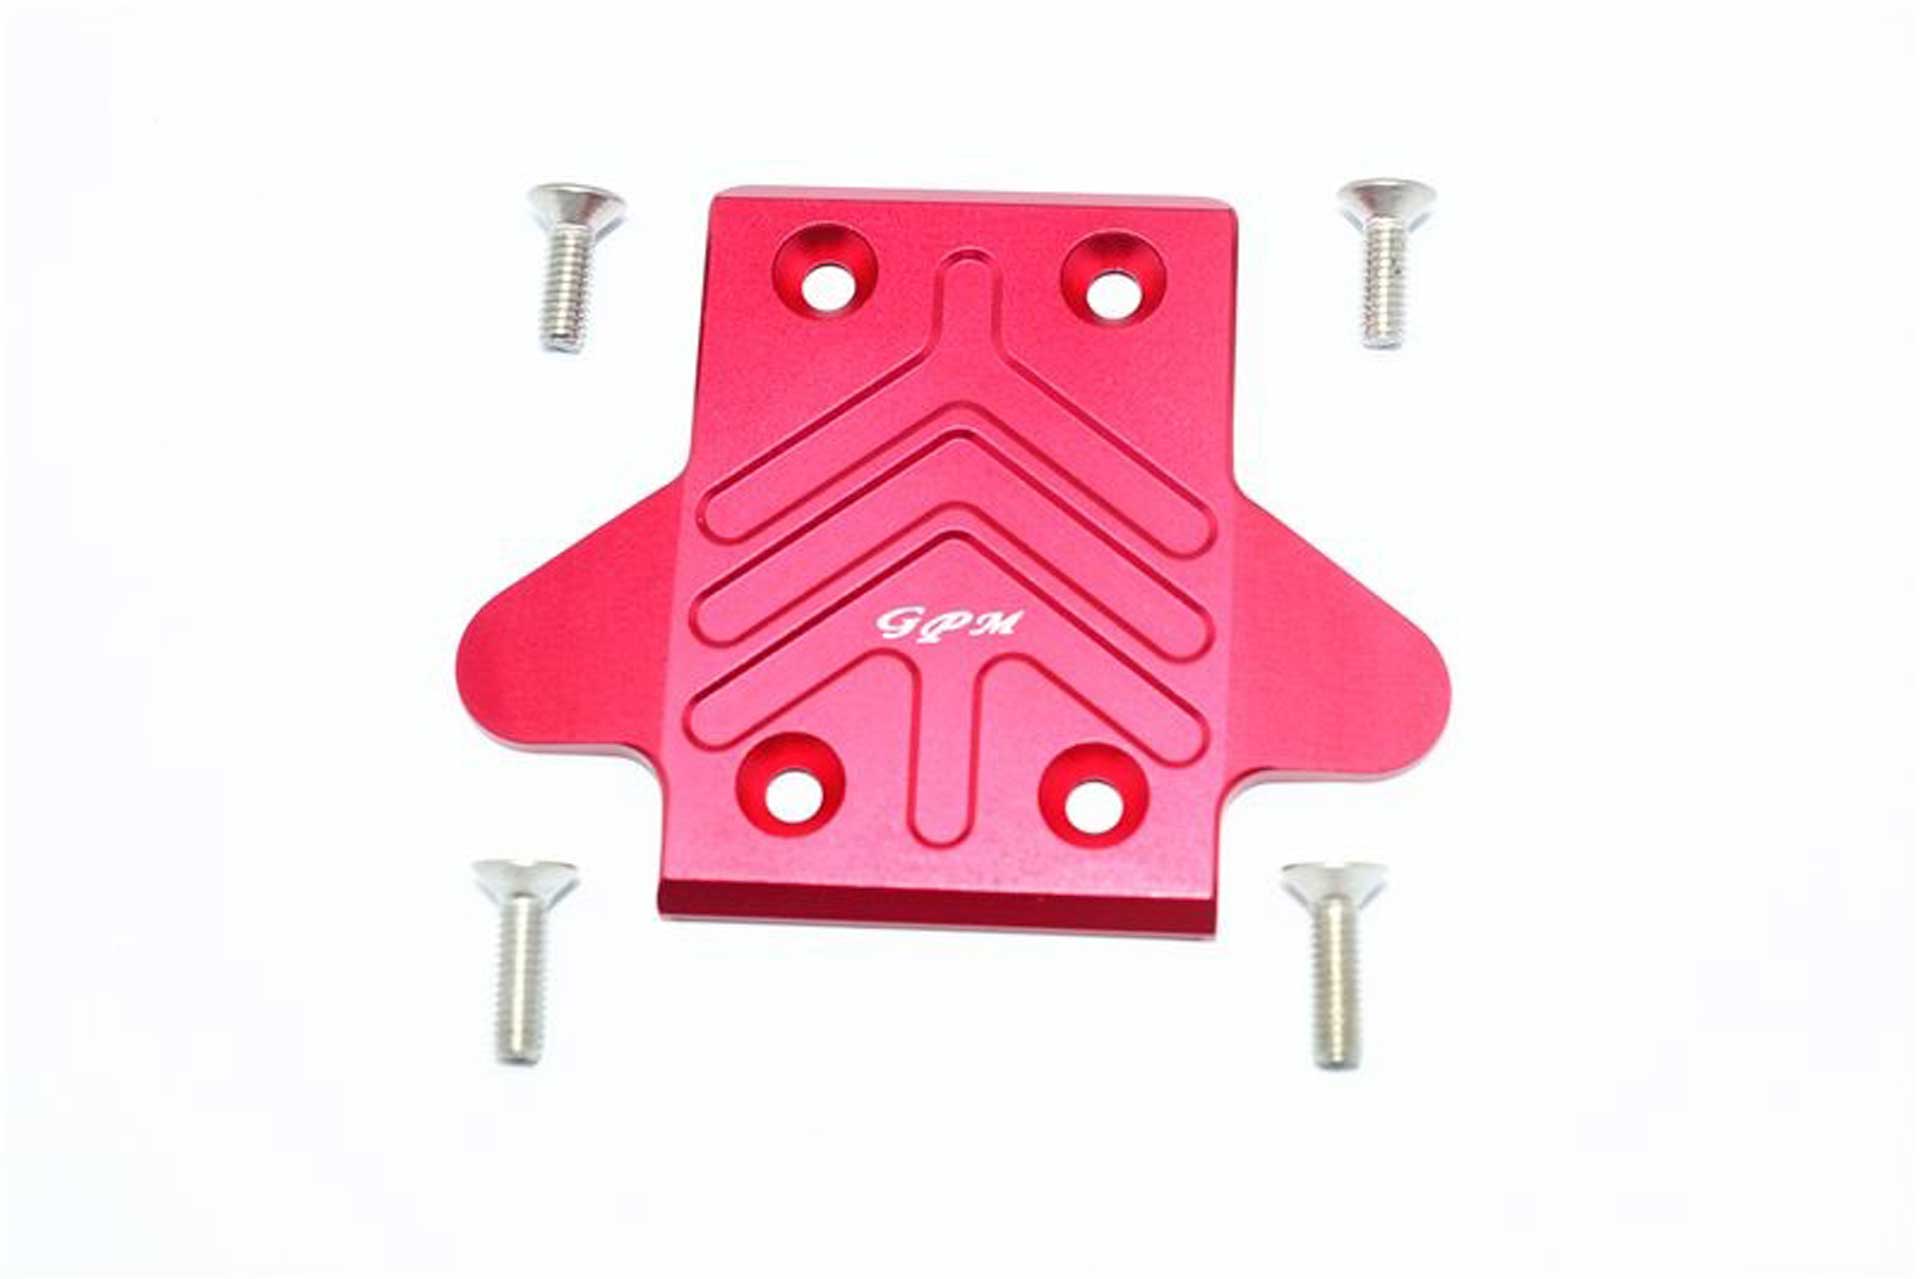 GPM ALUMINUM REAR CHASSIS PROTECTION PLATE -5PC SET red GPM ARRMA KRATON OUTCAST SENTON NOTORIOUS (older versions)